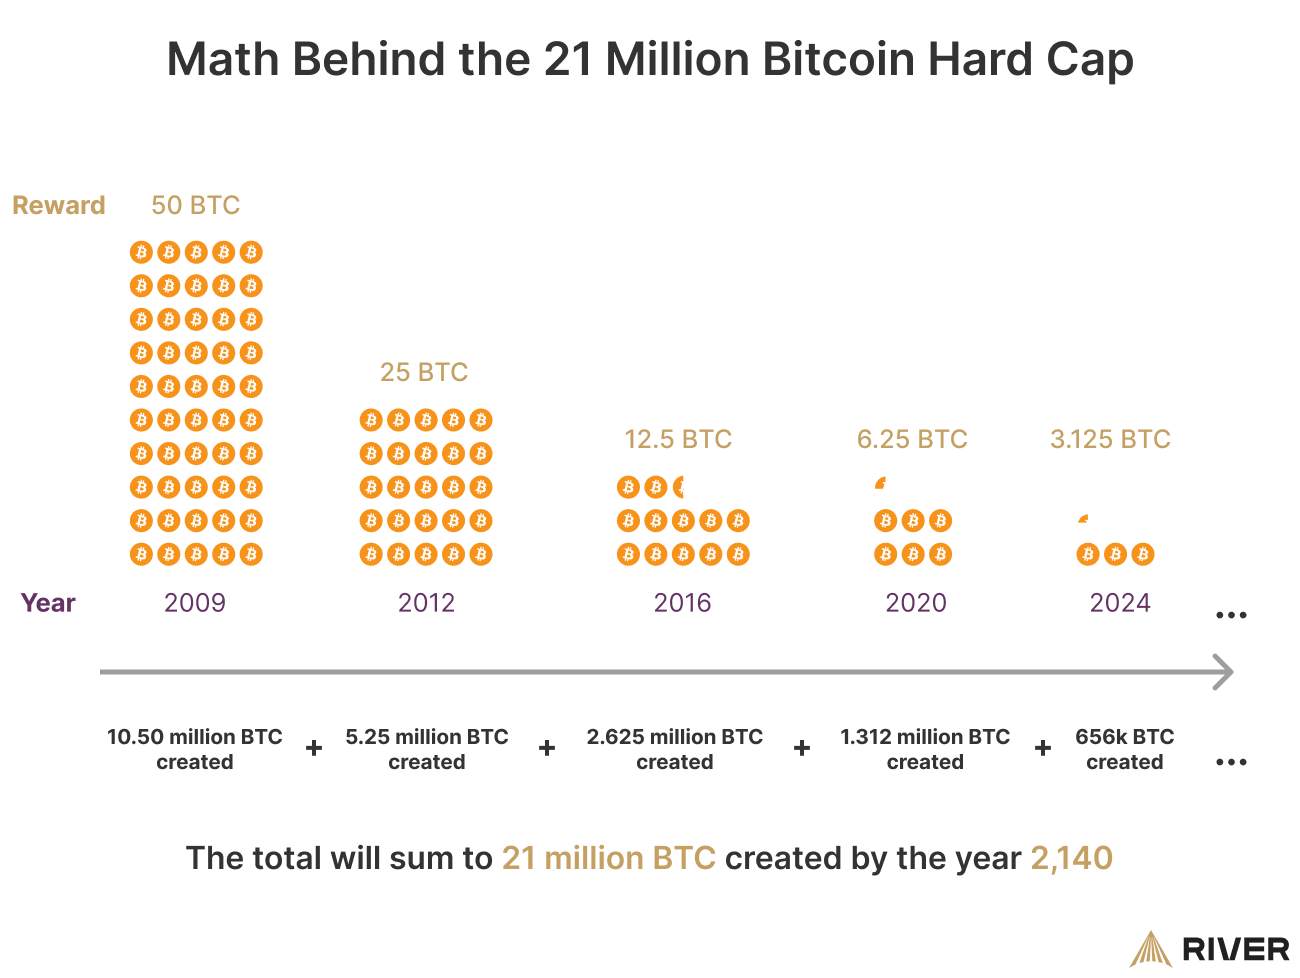 An infographic showing Bitcoin’s halving events and the decreasing reward over years, leading to a total of 21 million BTC by 2140.